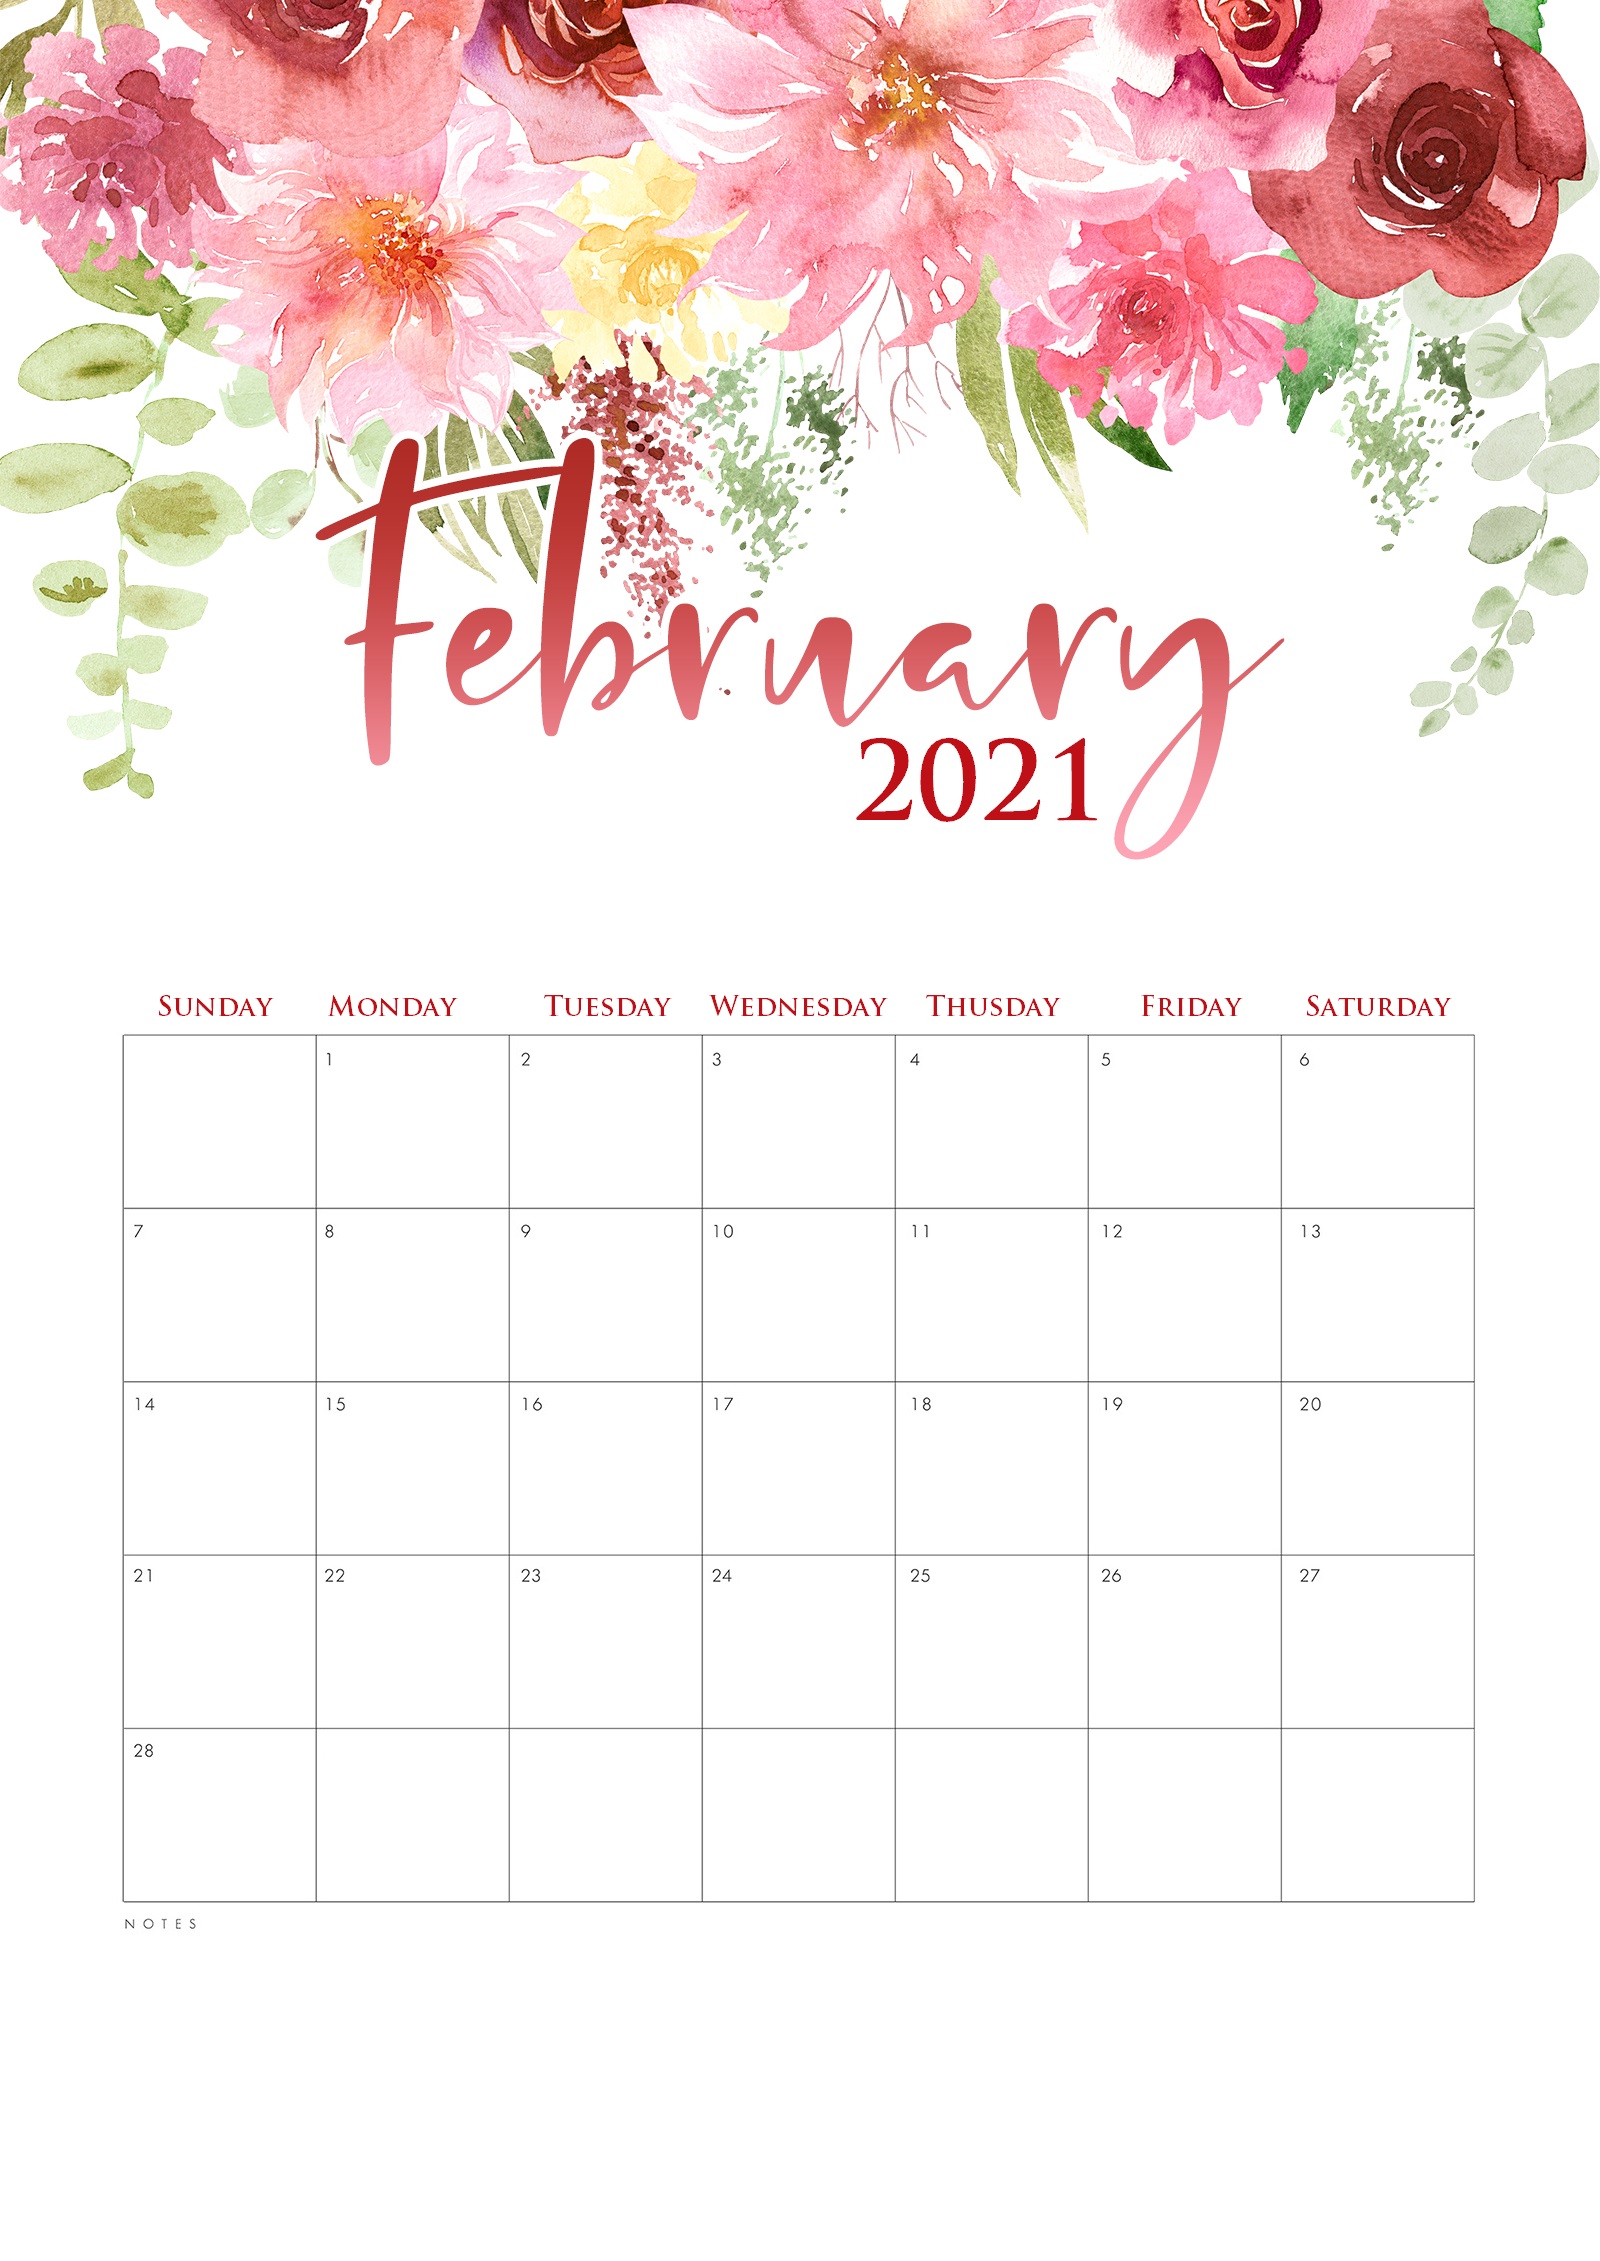 30 Free February 2021 Calendars For Home Or Office Onedesblog Simple monthly planner and calendar for february 2021. 30 free february 2021 calendars for